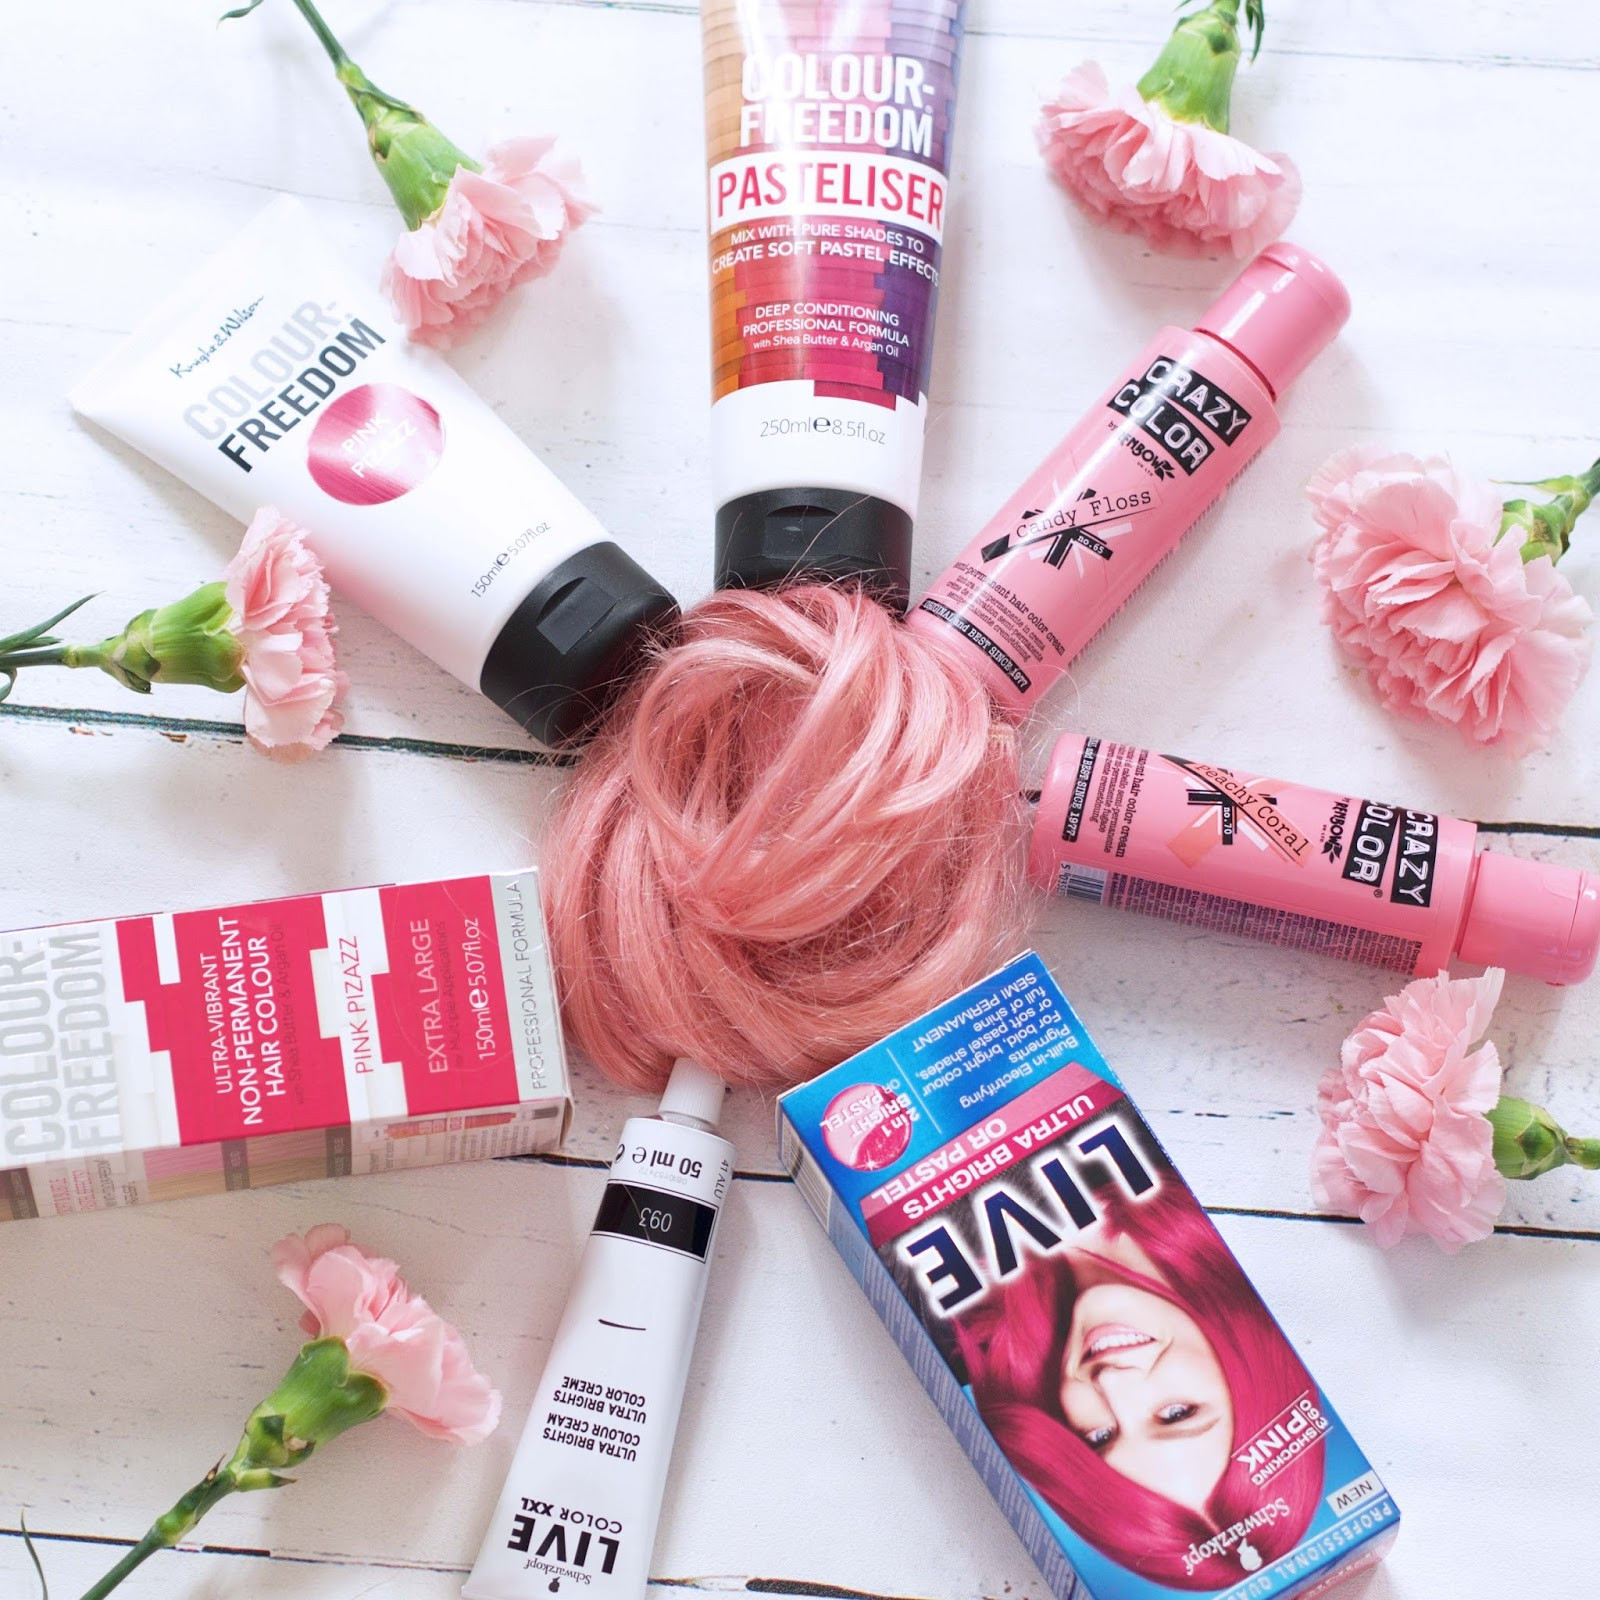 DIY Pastel Pink Hair
 All about Pastel Pink hair and best products to dye at